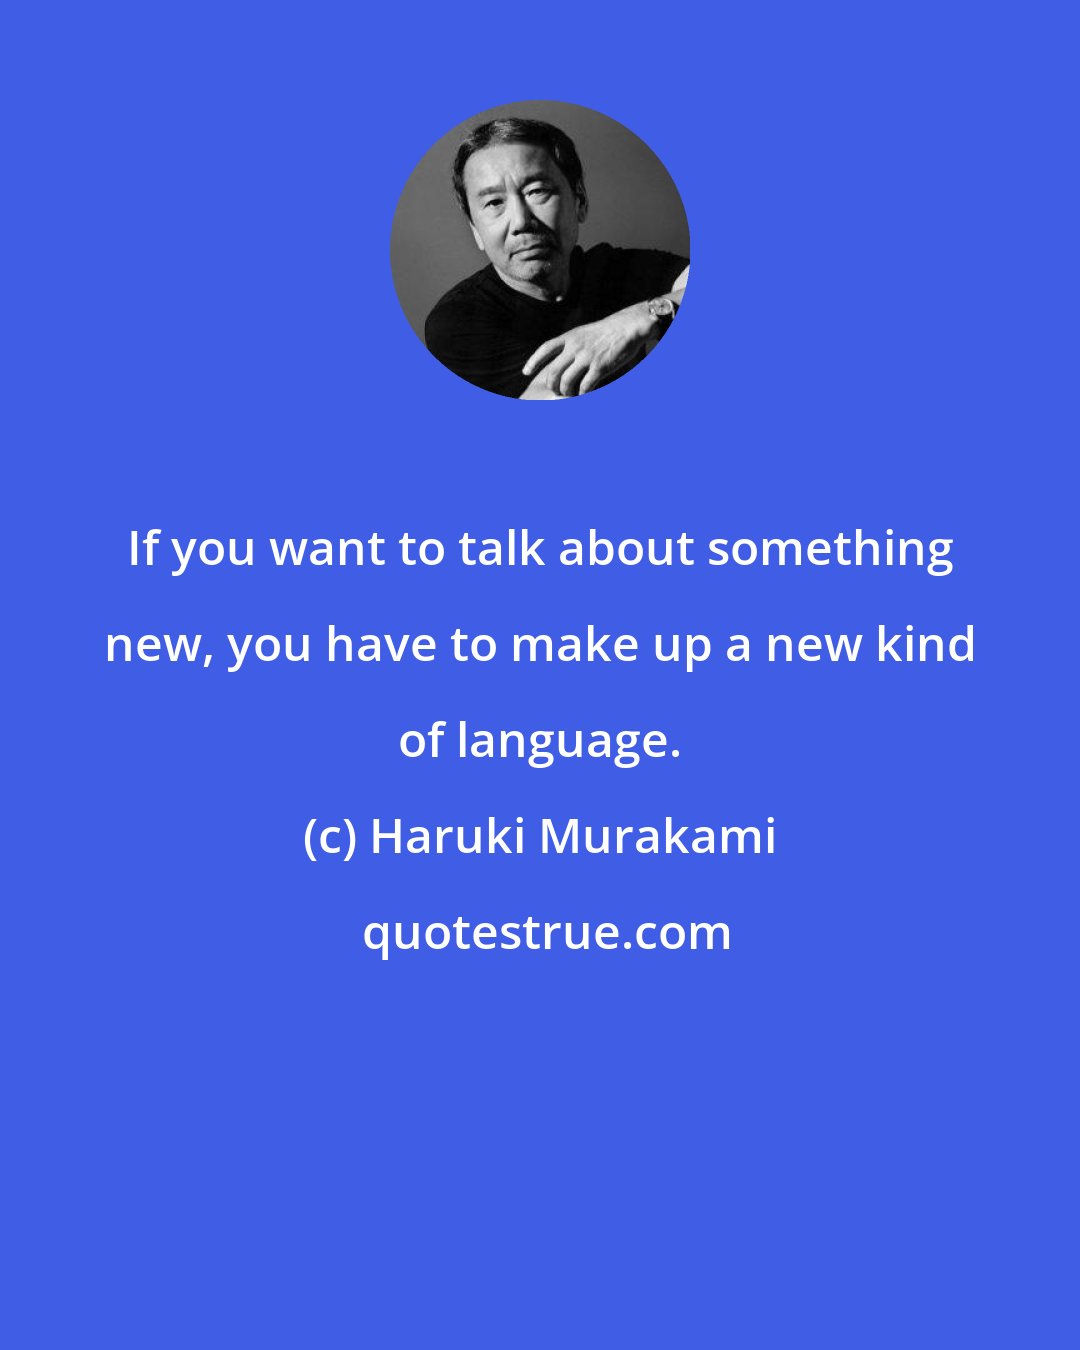 Haruki Murakami: If you want to talk about something new, you have to make up a new kind of language.